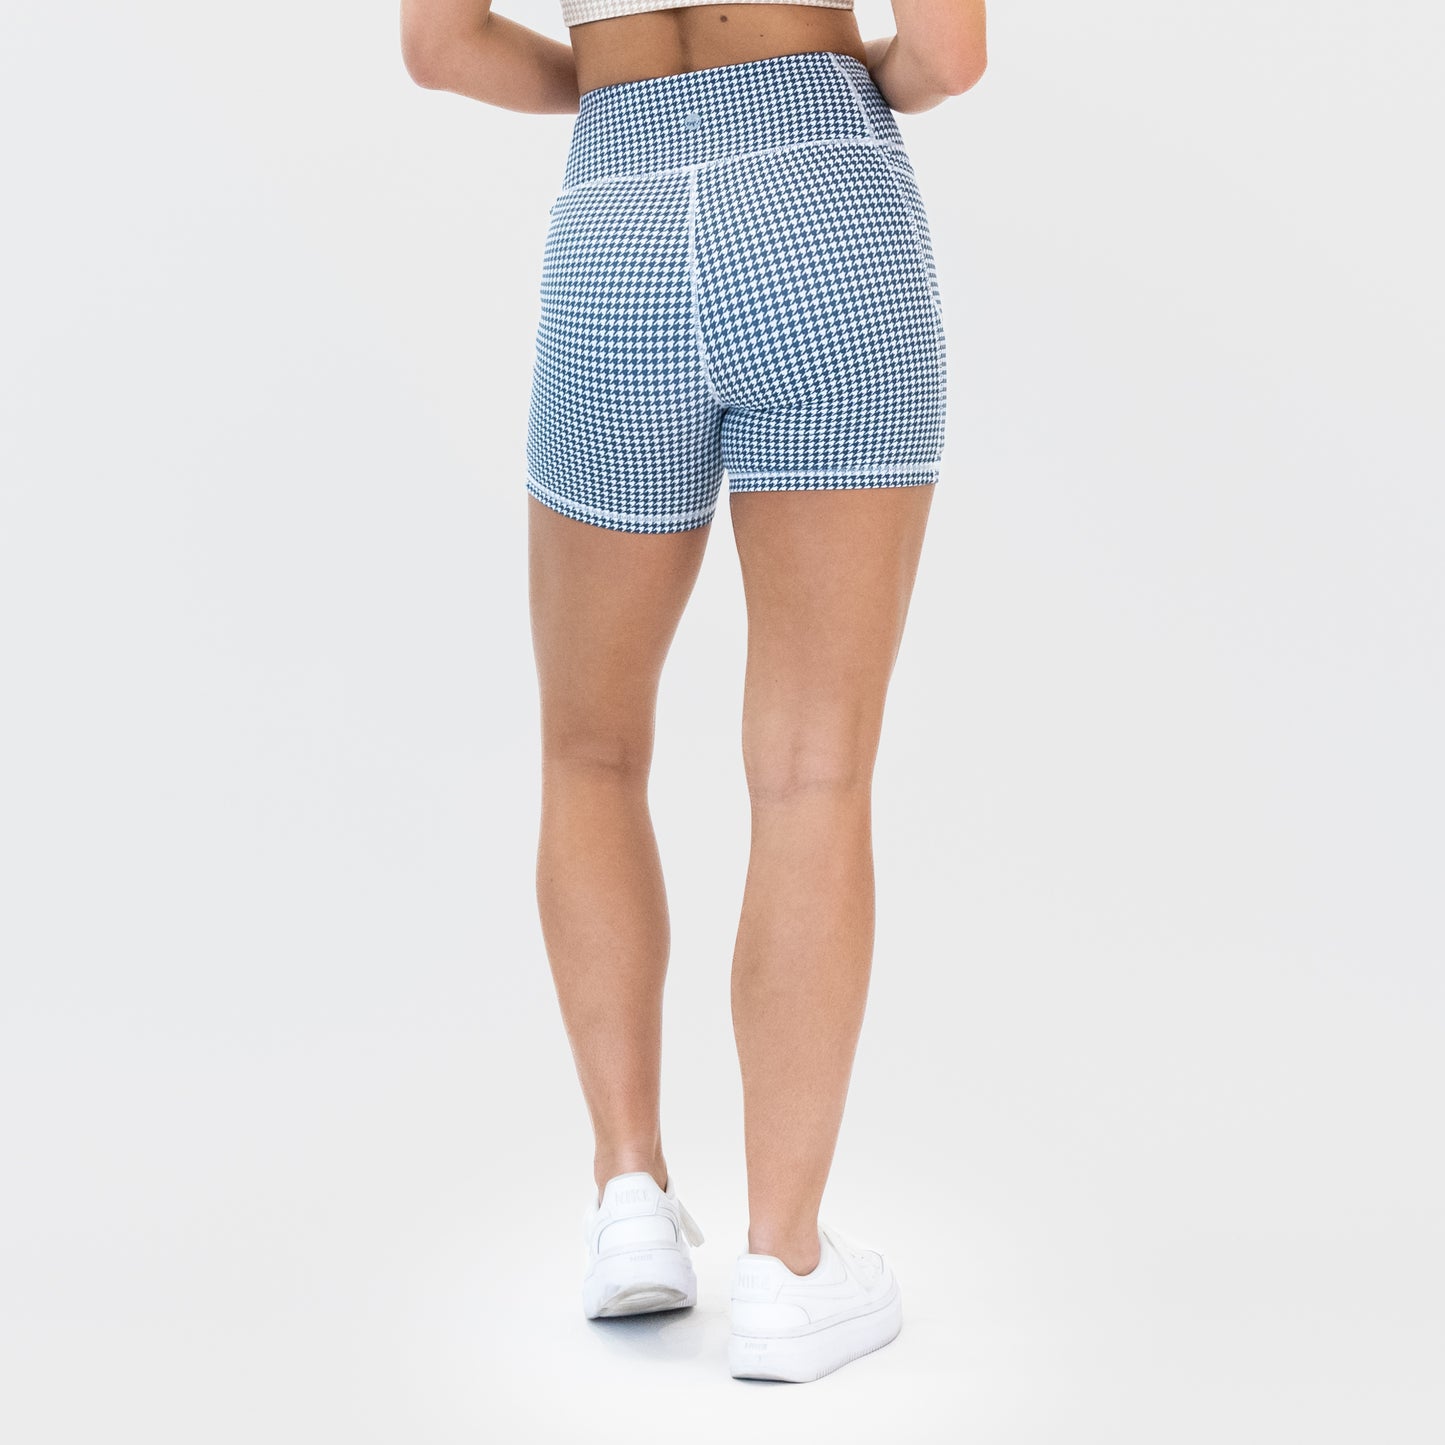 Lux Baseline Shorts (5 in. inseam) - Light Navy Houndstooth